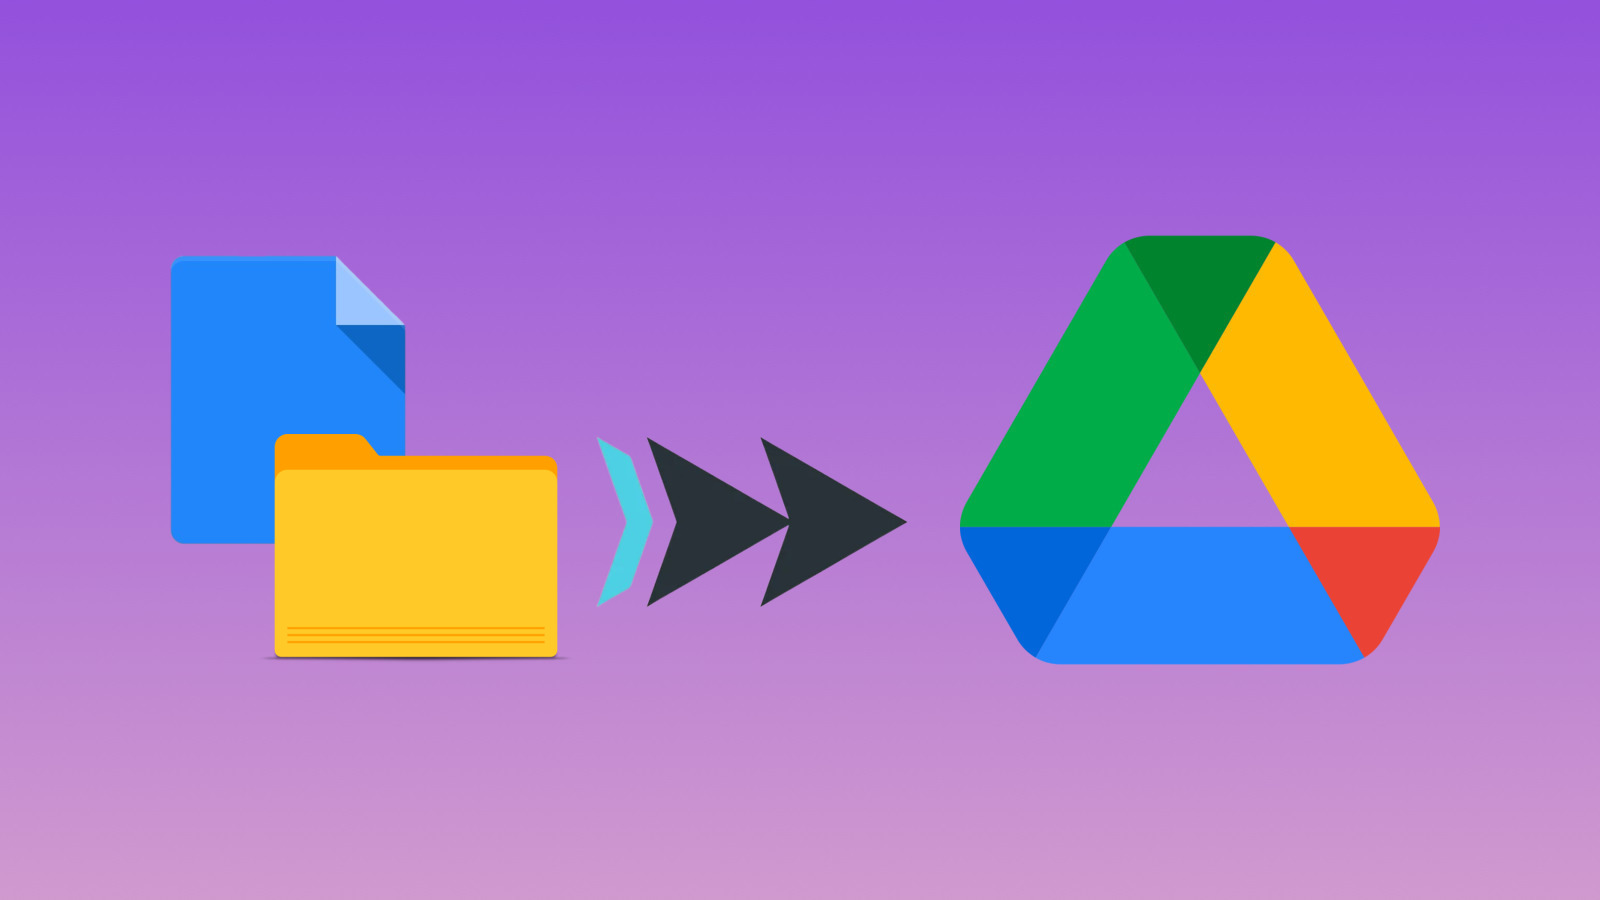  You can expand the memory of your Google Drive account.